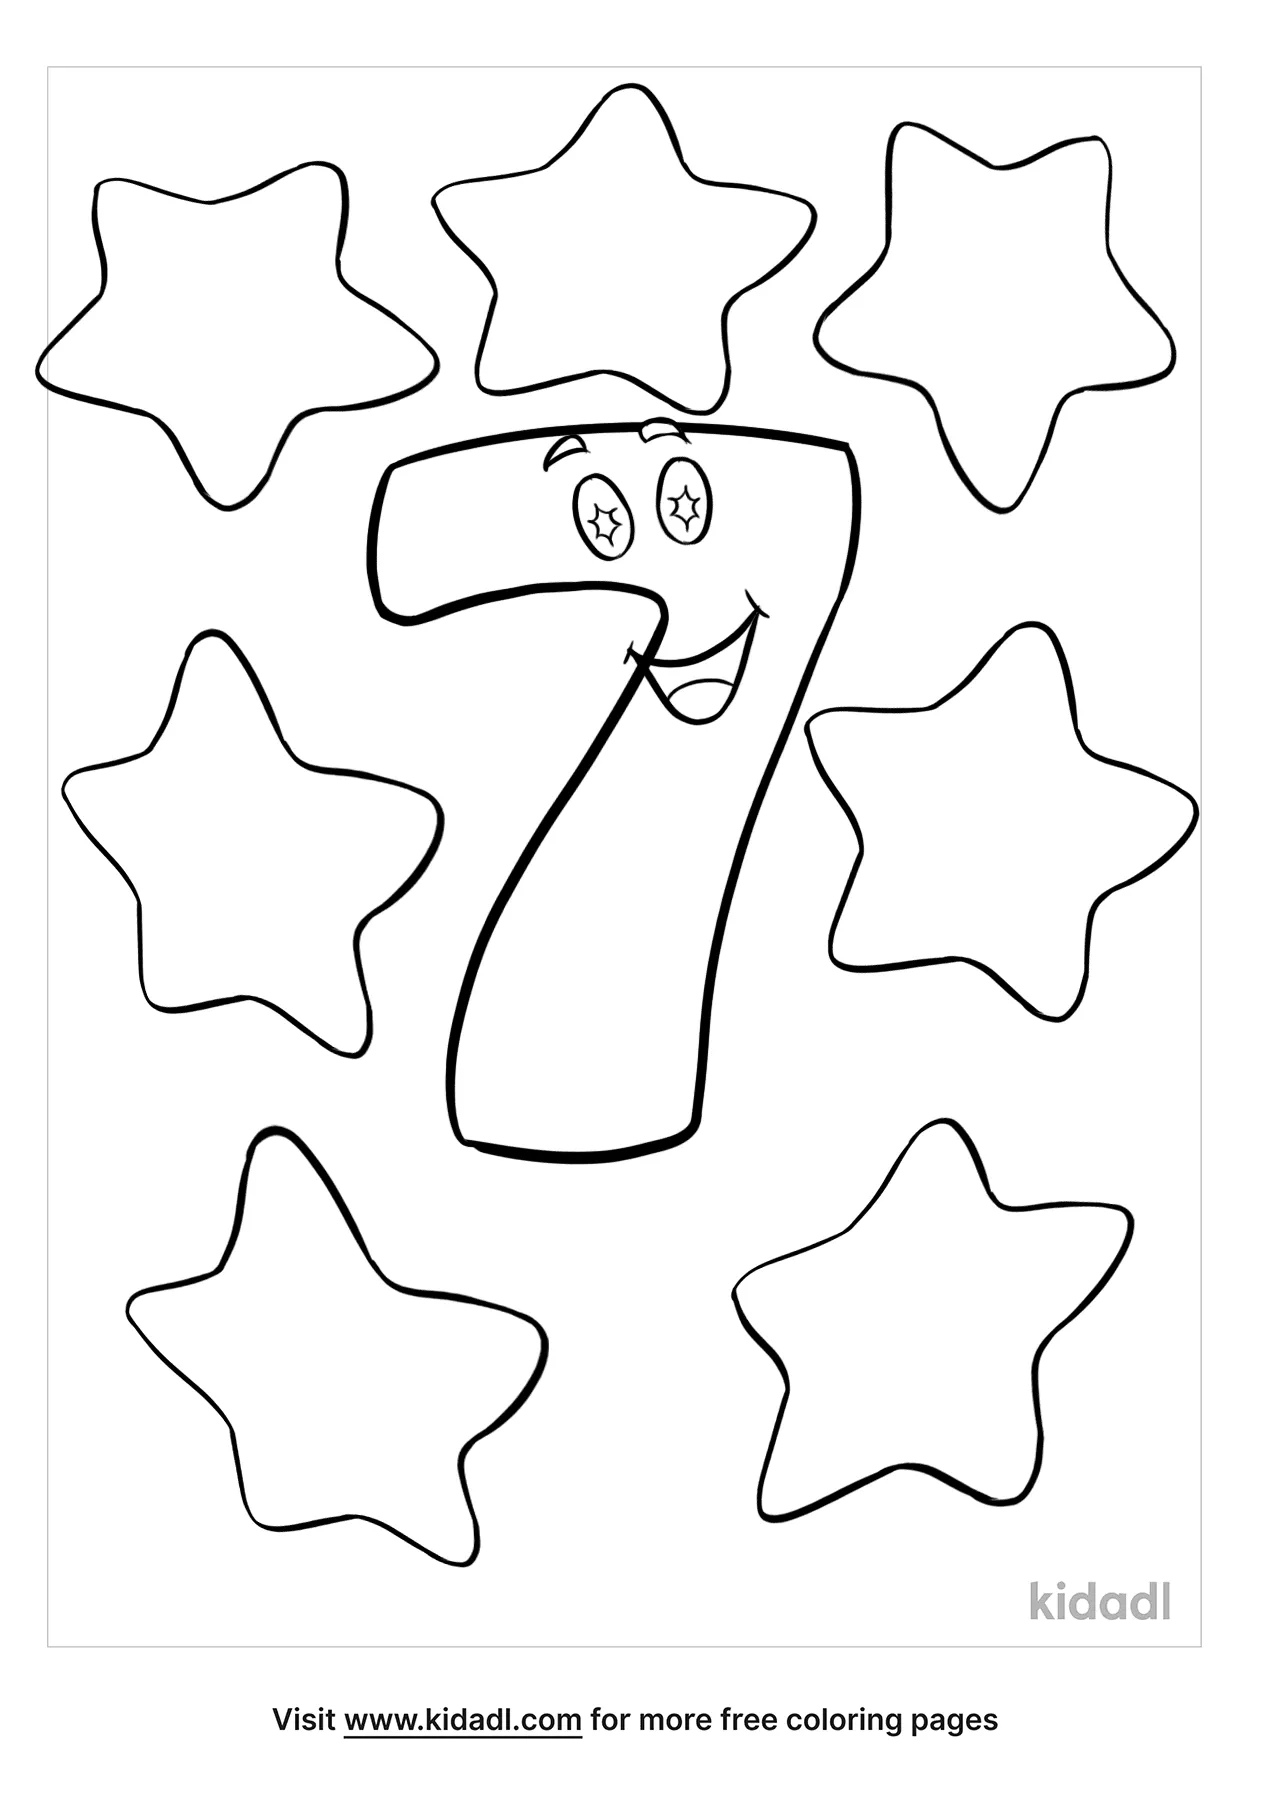 Number 7 Coloring Pages Free Numbers Coloring Pages Kidadl